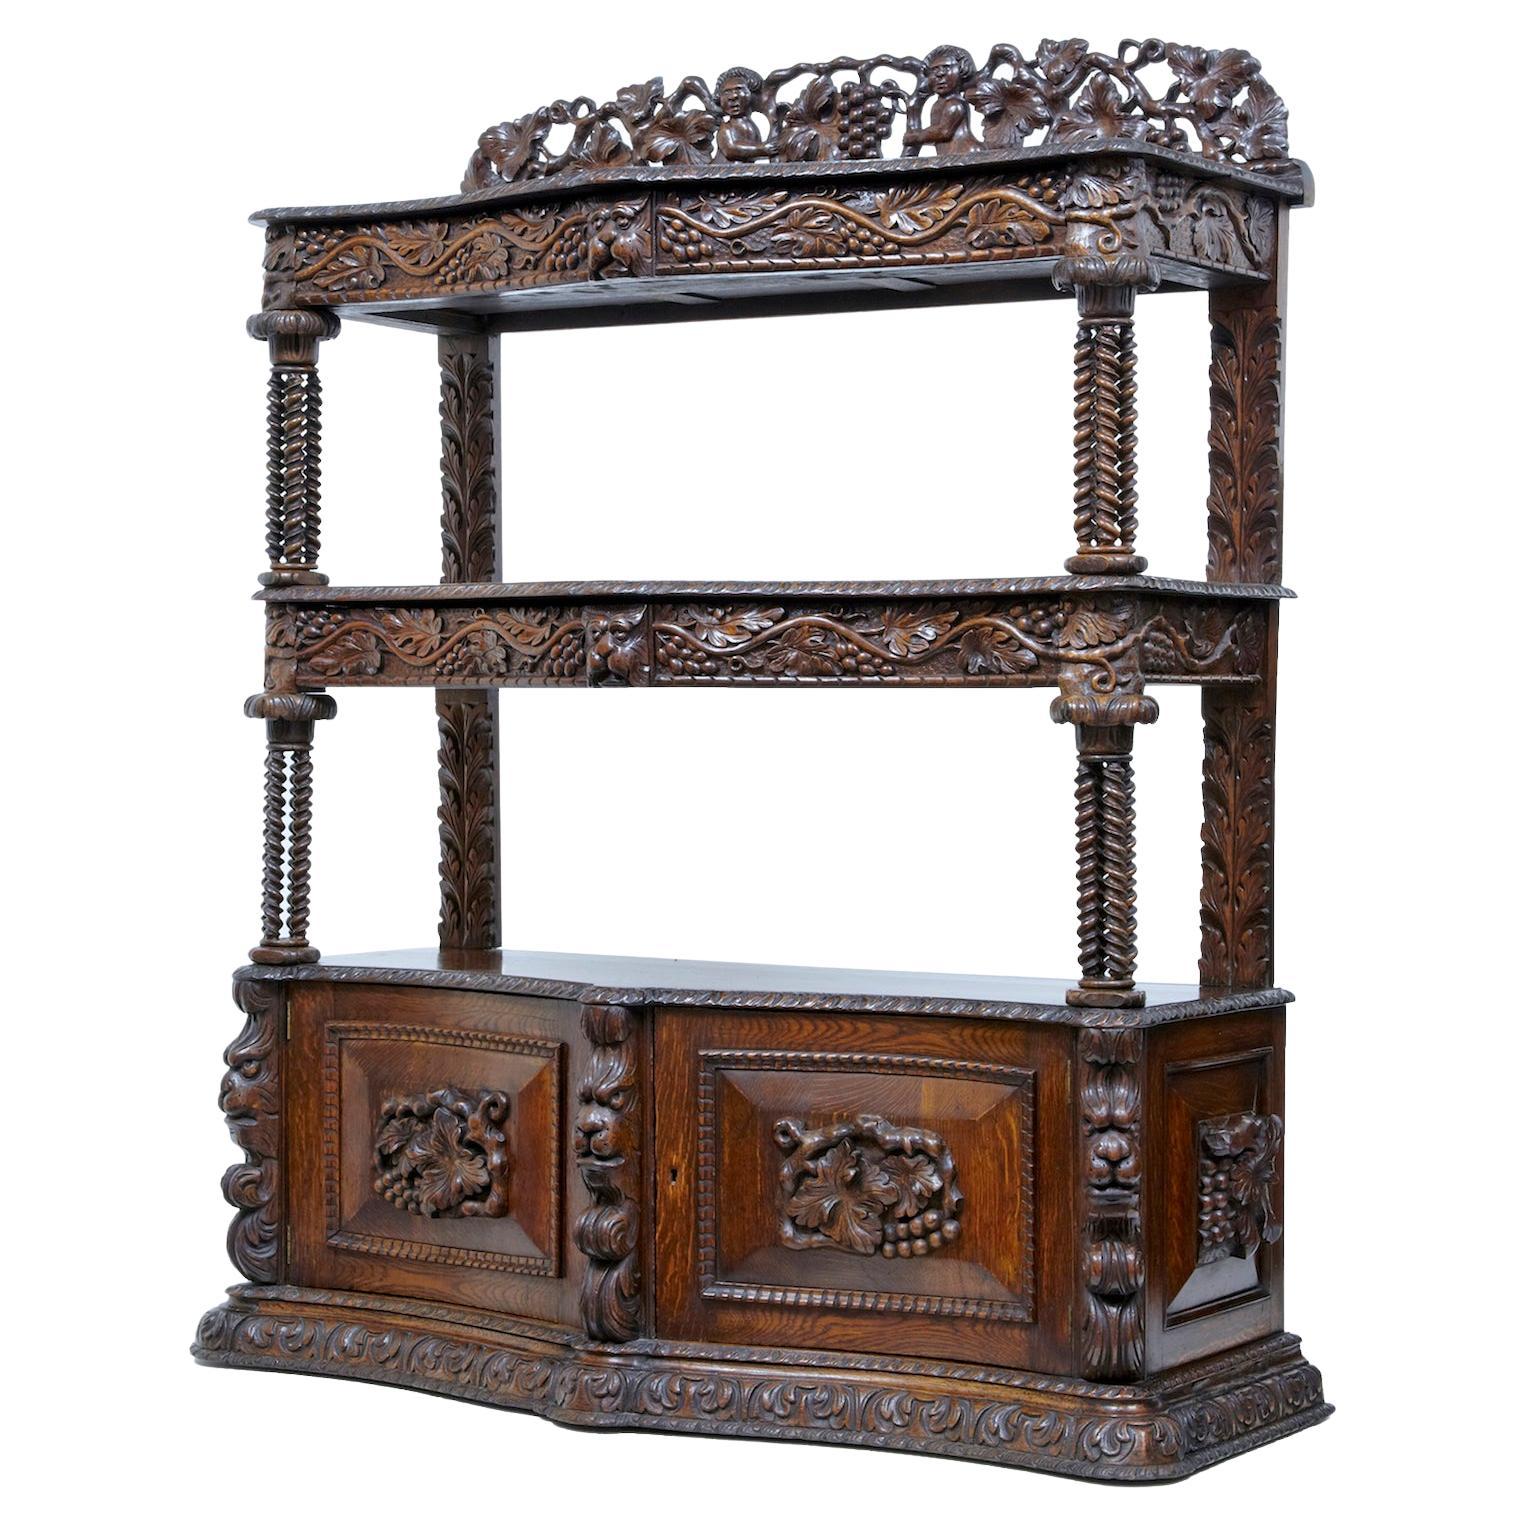 19th century profusely carved Victorian oak buffet For Sale